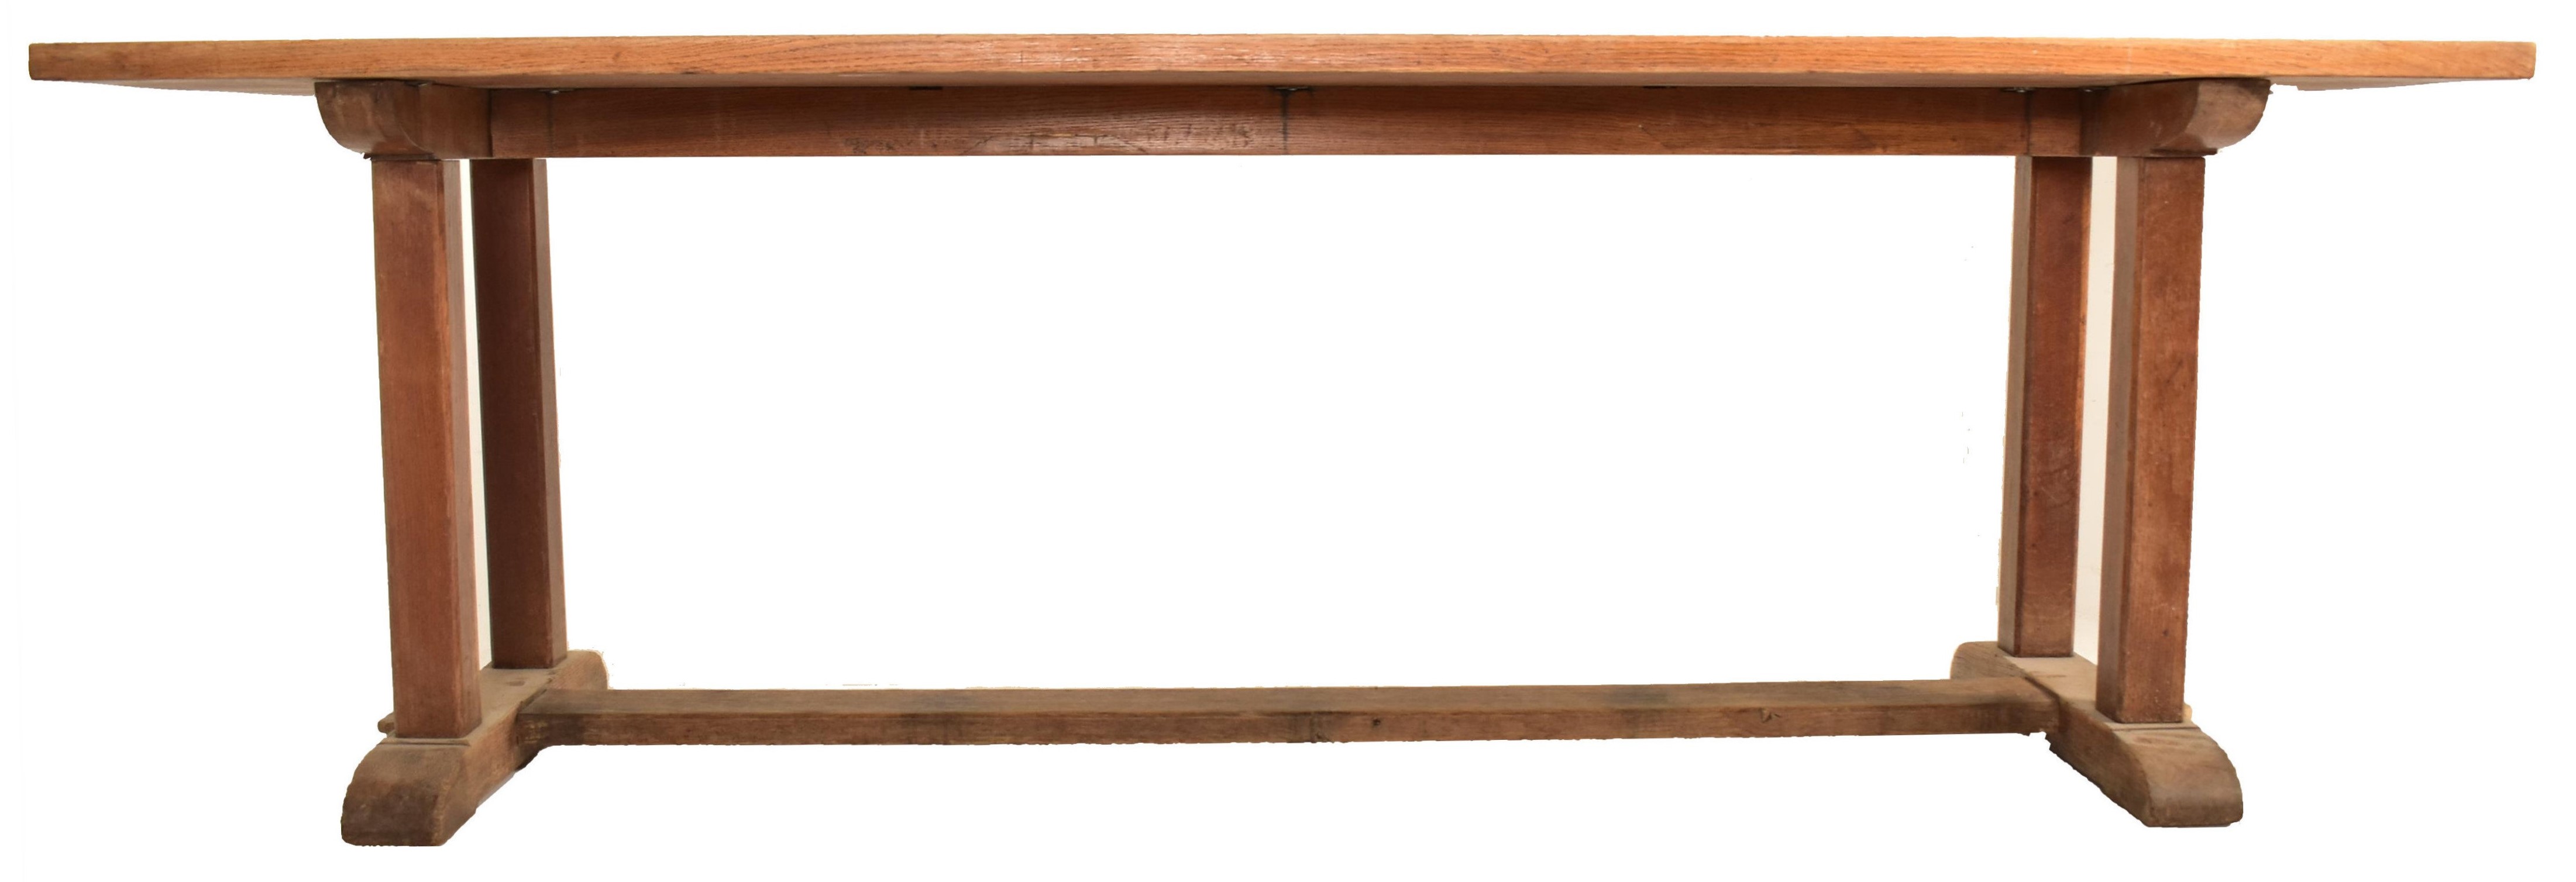 WITHDRAWN - LARGE 20TH CENTURY SOLID ELM REFECTORY DINING TABLE